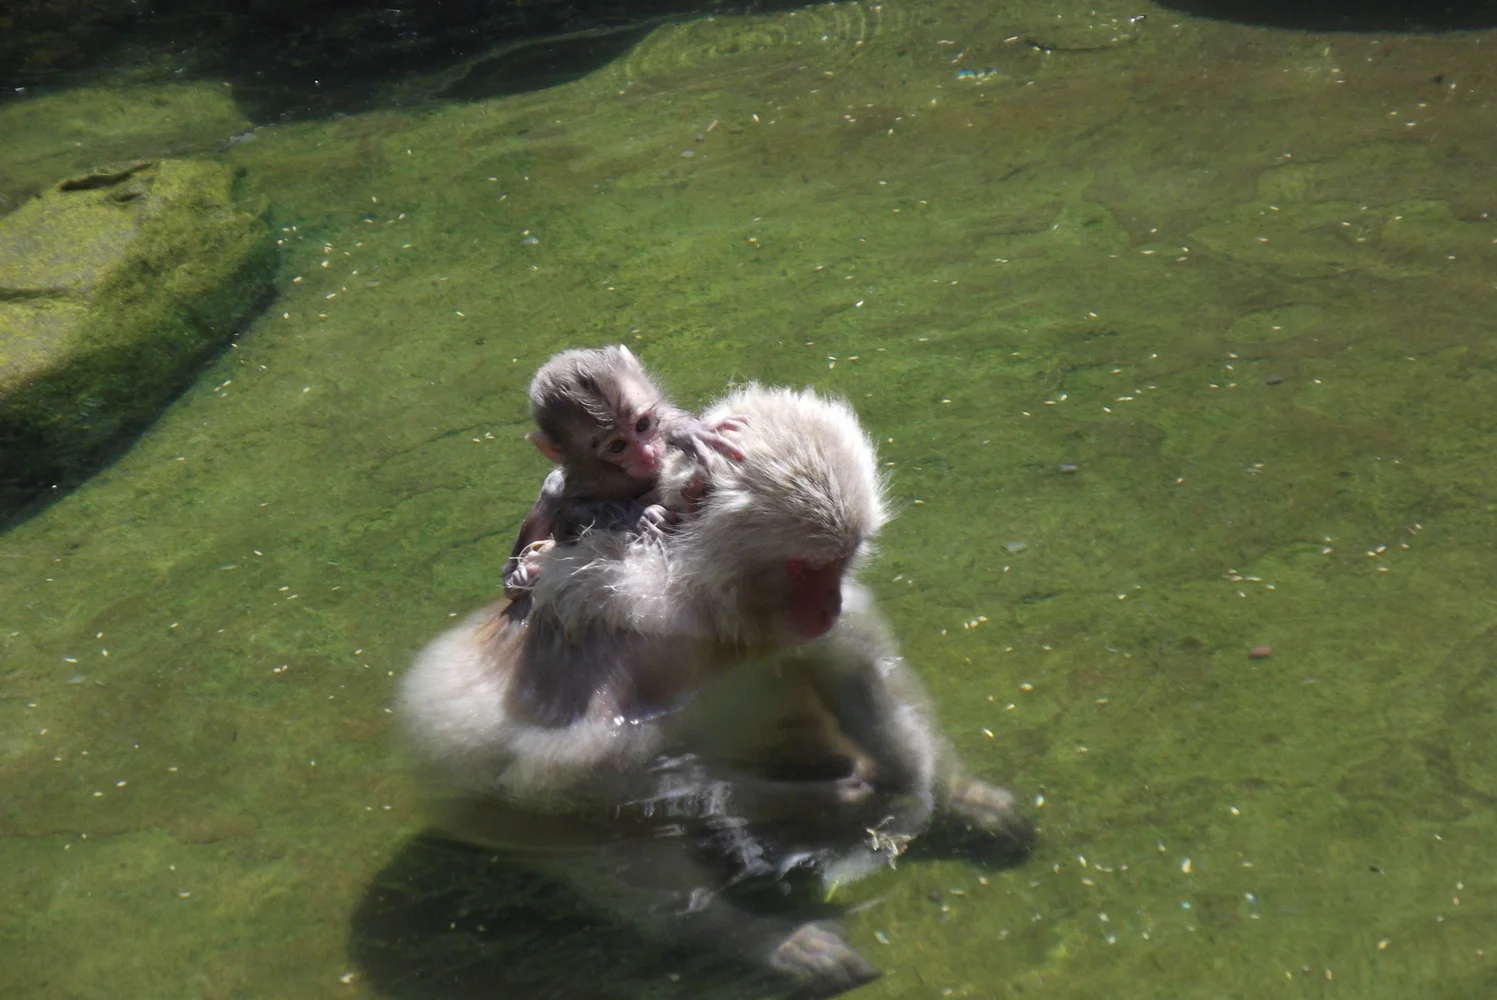 Go on a one day trip to see the Snow Monkeys!